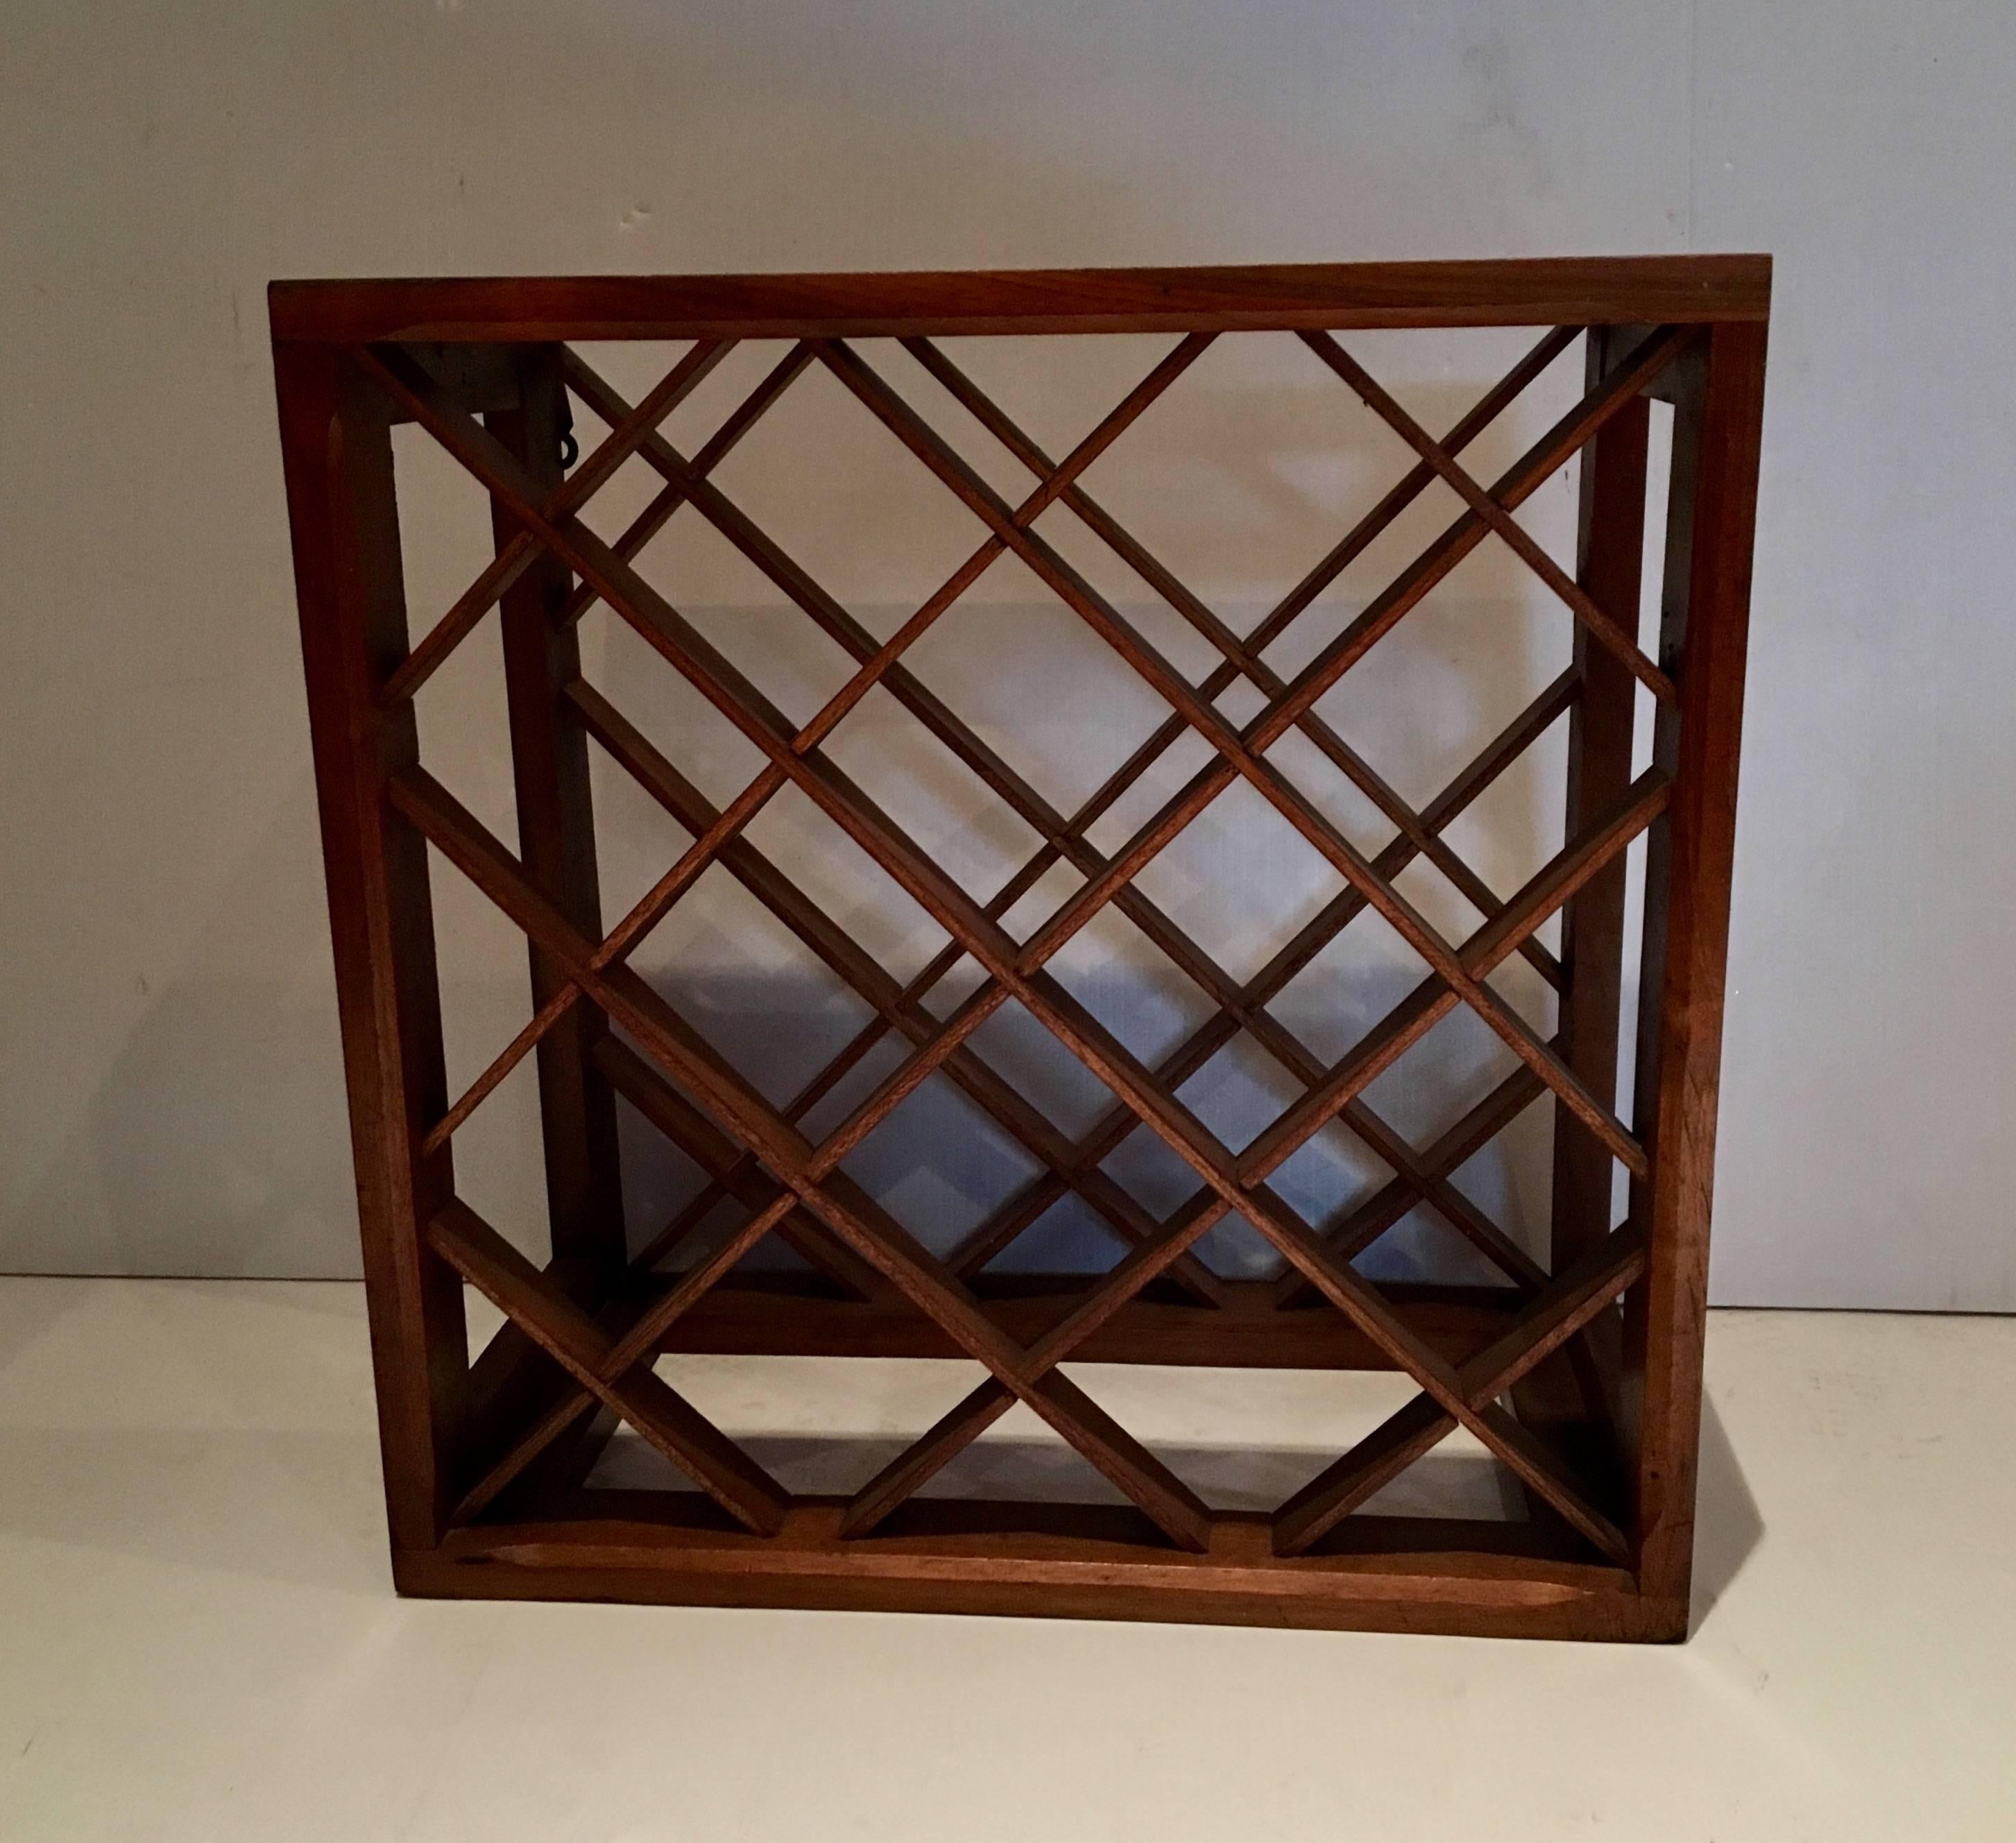 Simple elegant American walnut wine rack, can be hang on the wall or use on top of a table, 12 bottle capacity freshly refinished Versatile, circa 1960s.